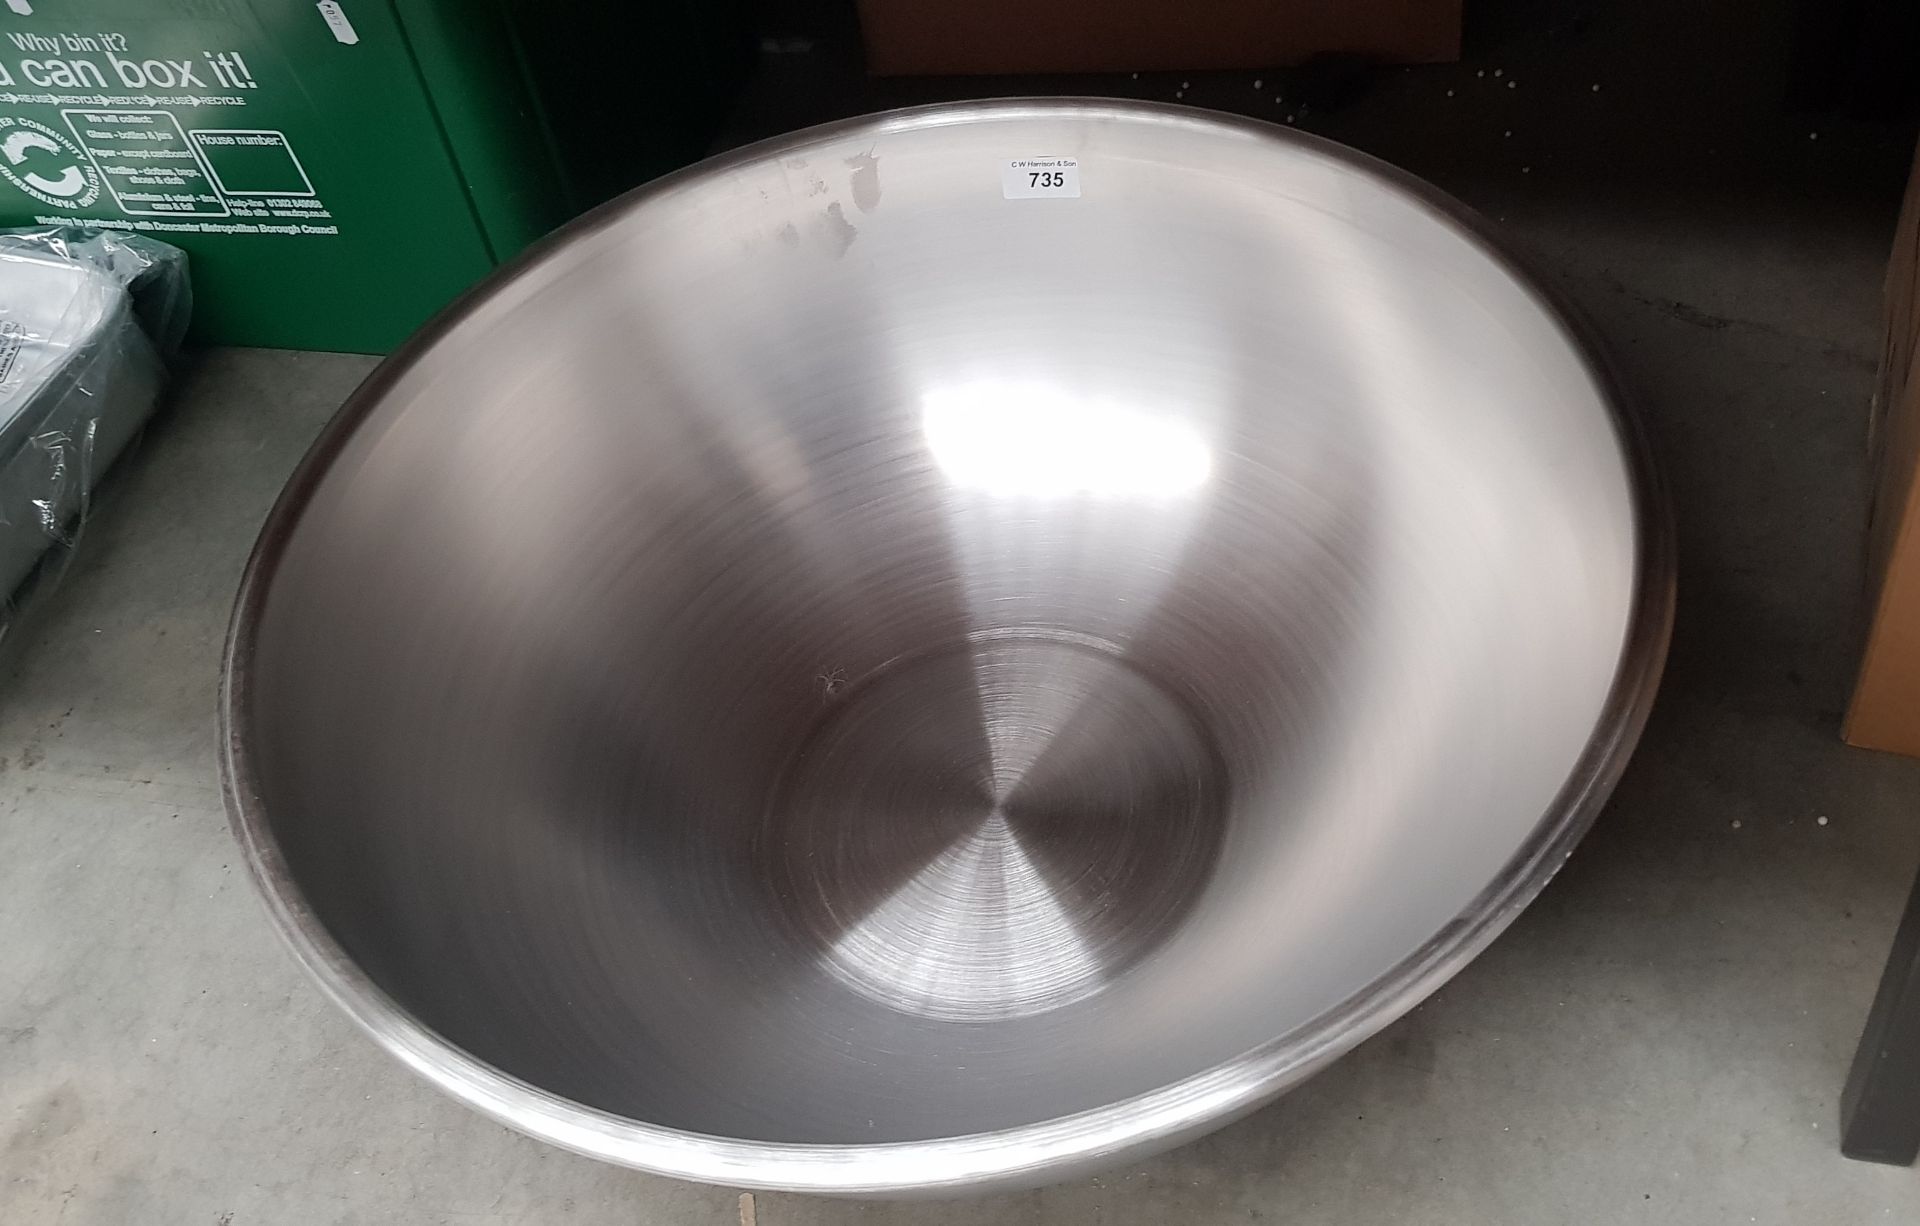 MSF STAINLESS STEEL 79300 MIXING BOWL - VERY LARGE